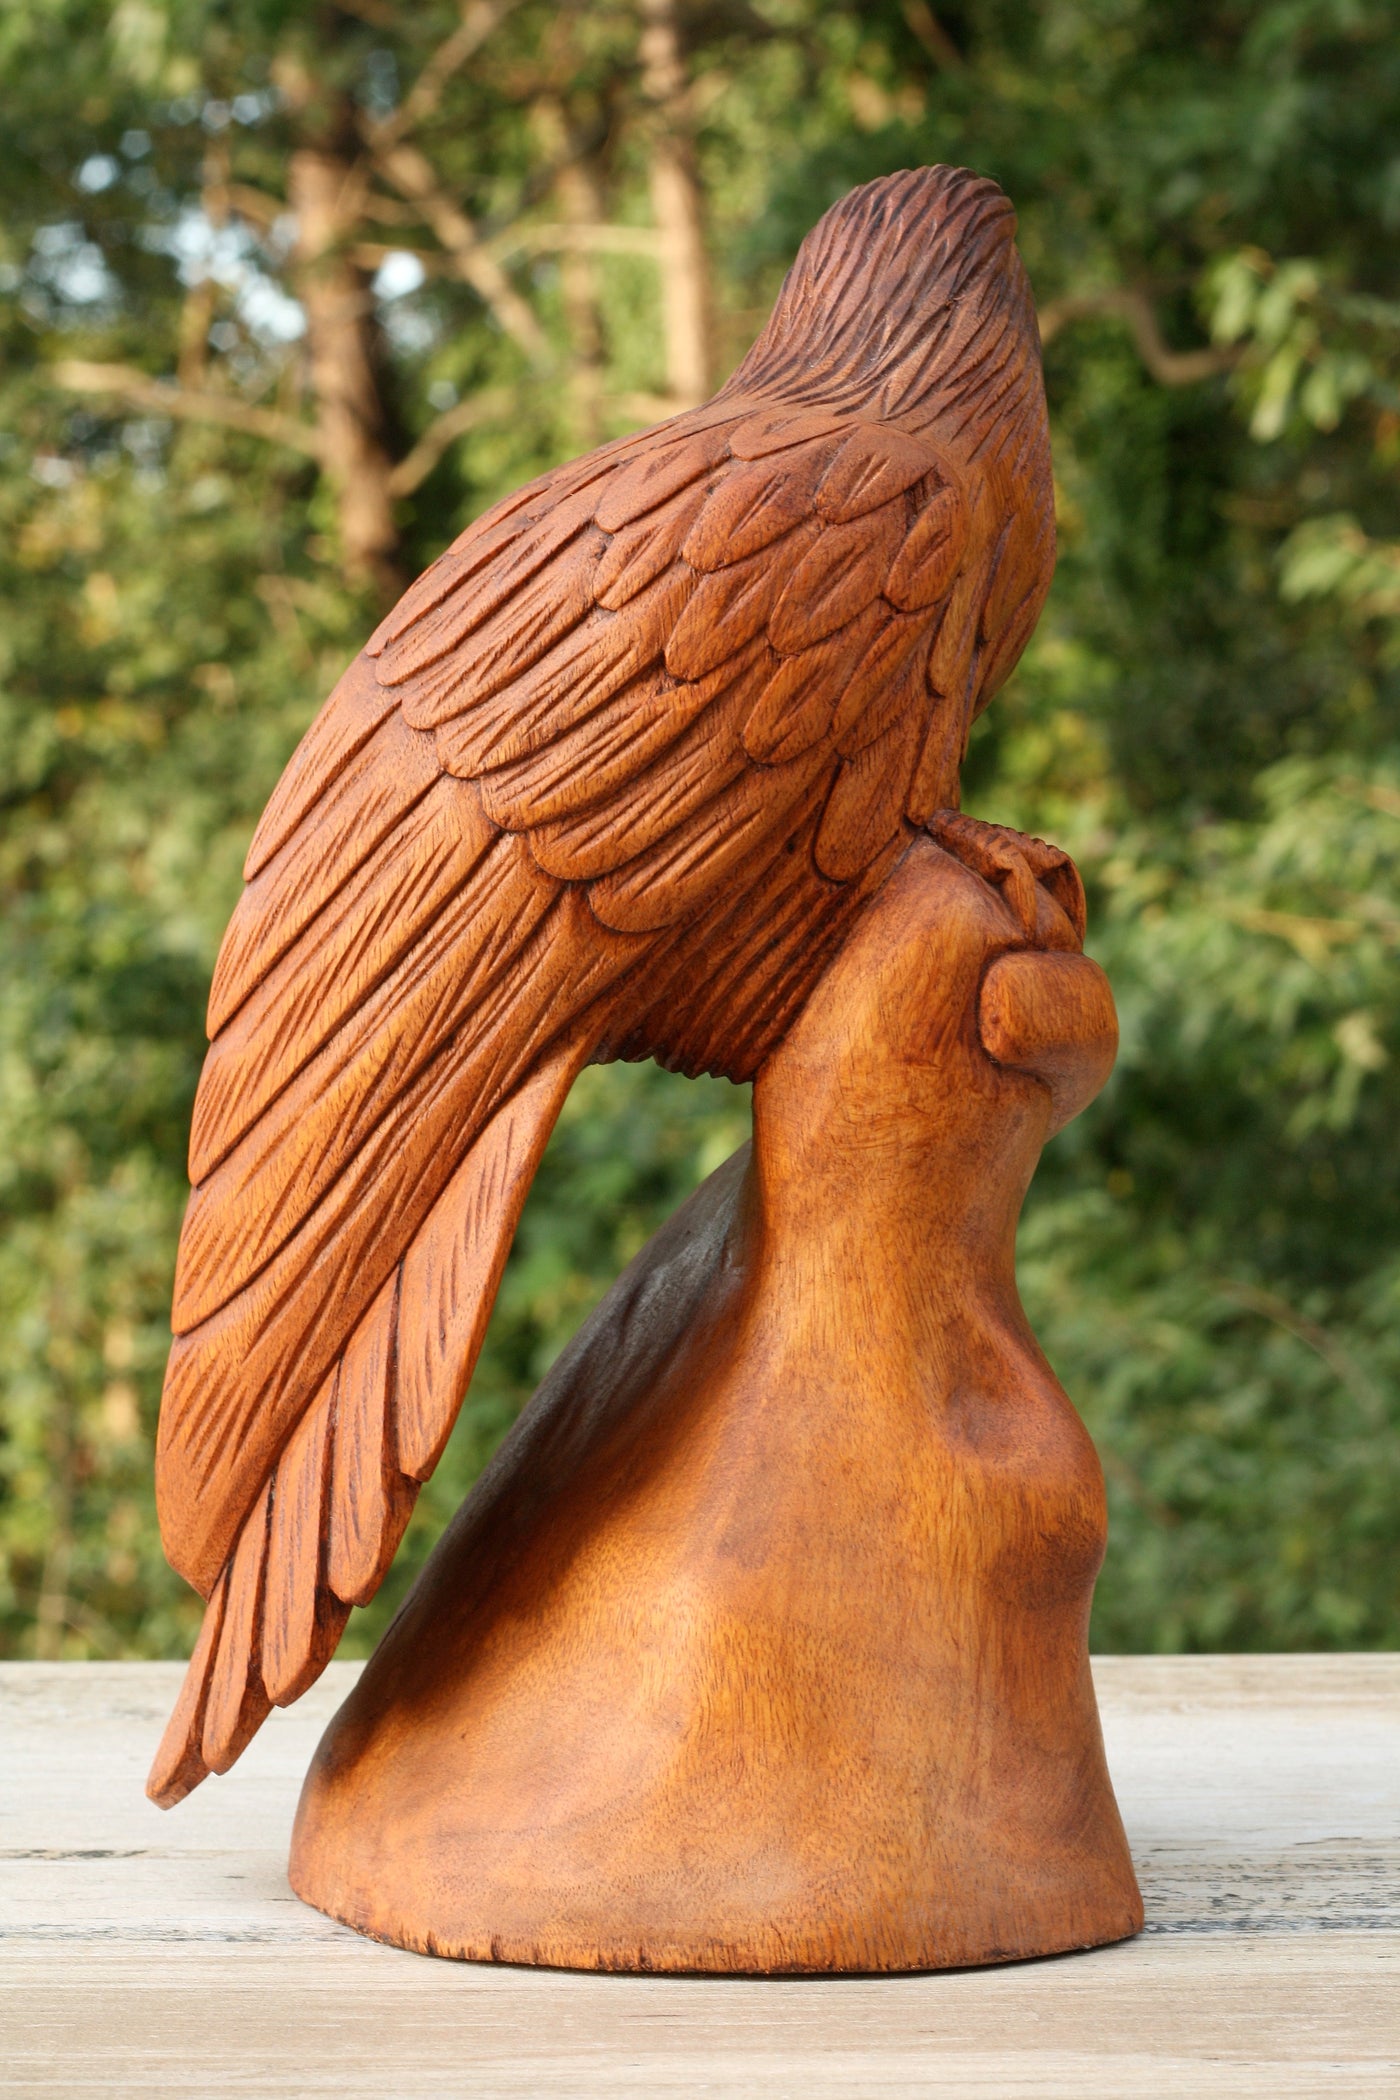 12" Large Big Solid Wooden Handmade American Eagle Statue Handcrafted Figurine Sculpture Art Hand Carved Rustic Lodge Outdoor Home Decor Us Accent